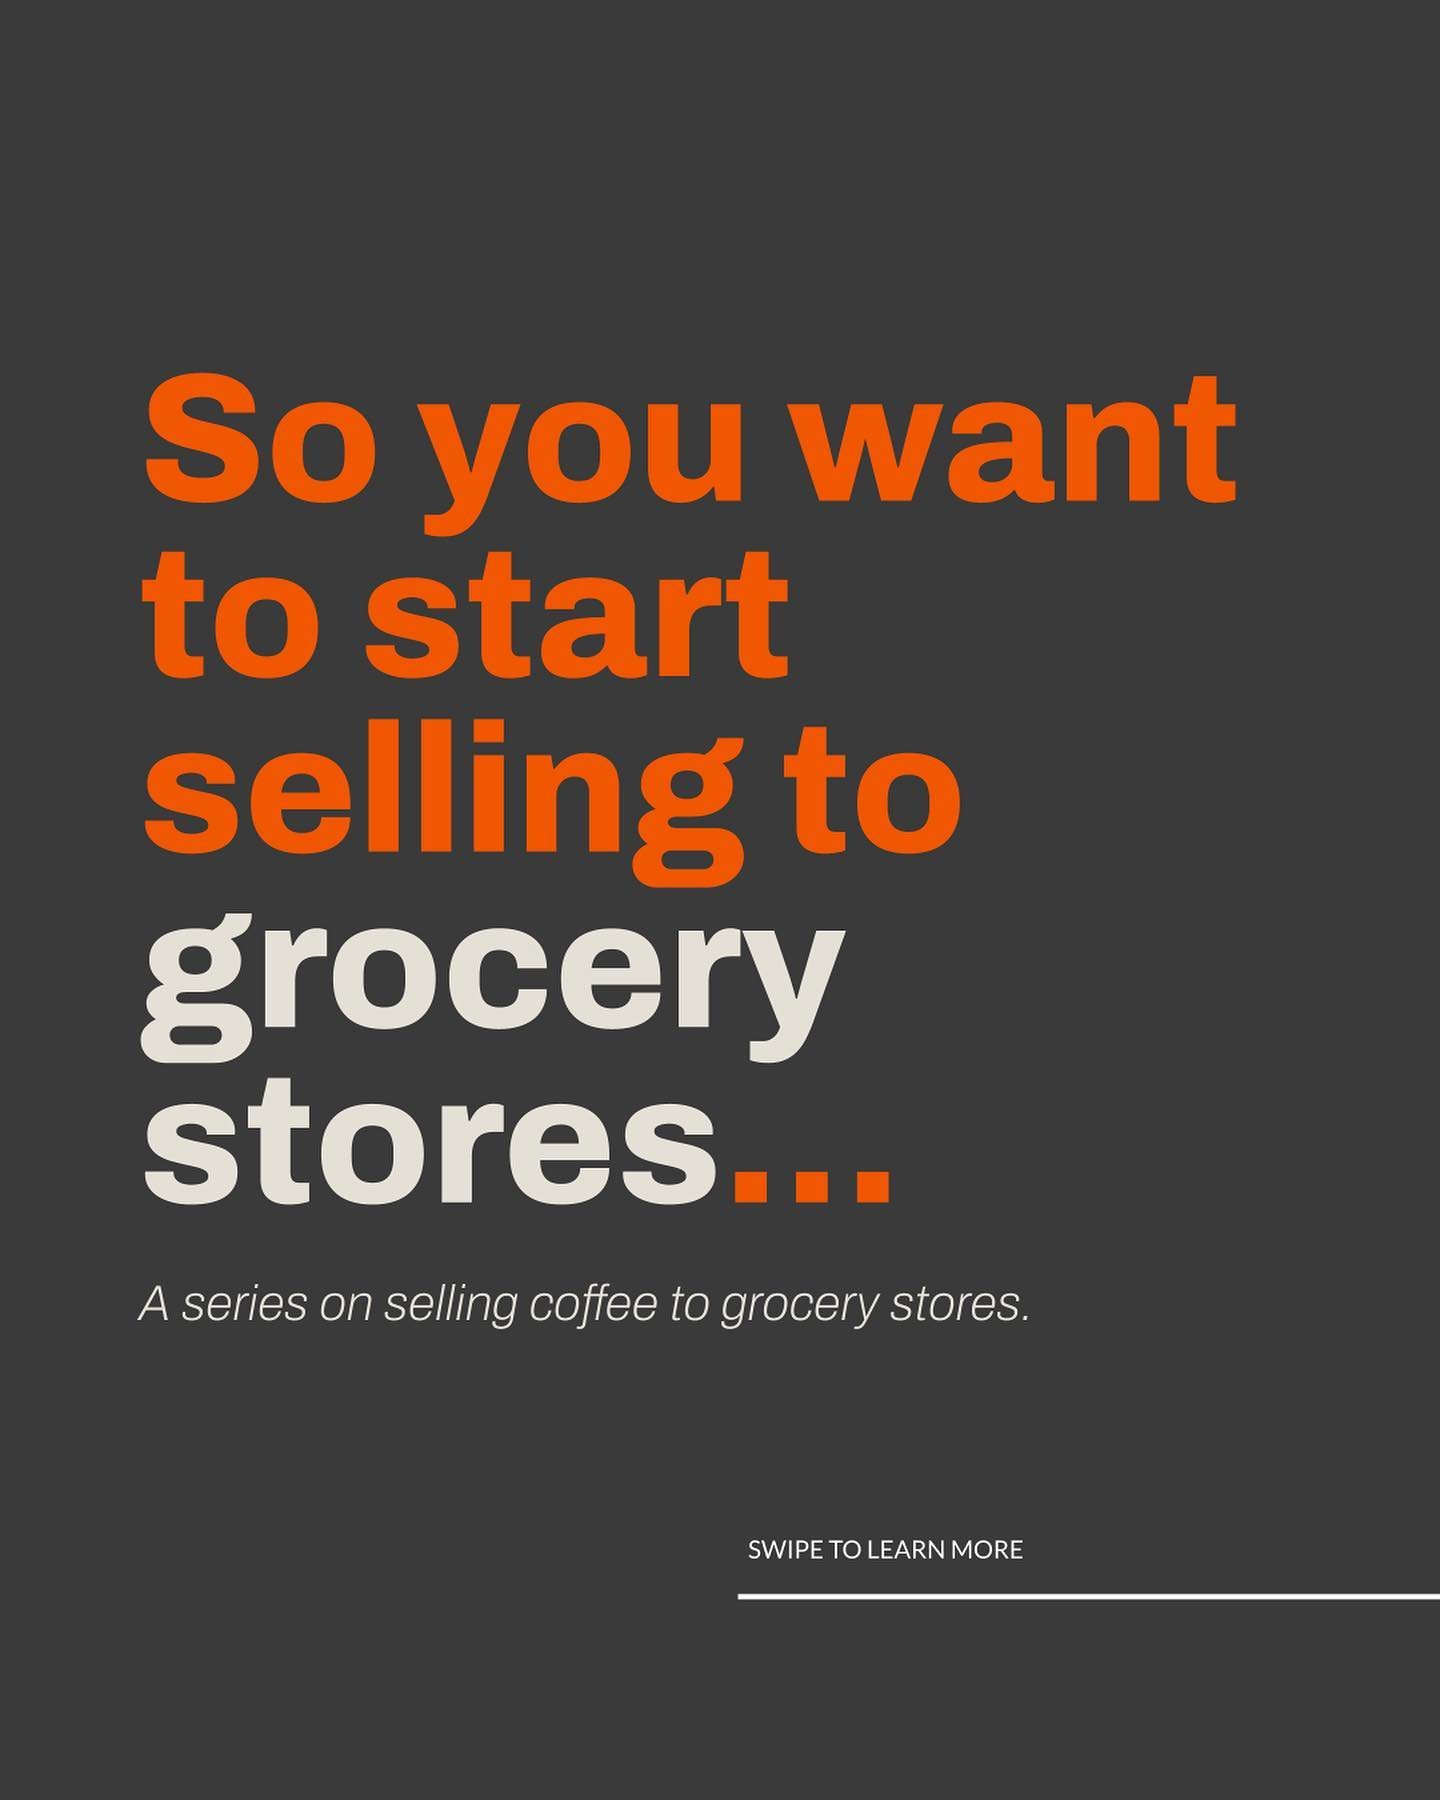 In this series, we&rsquo;ll talk about what questions to ask and some key things to think about before entering a vendor relationship with a grocery.

First up, FREE FILLS. For smaller specialty groceries, this doesn&rsquo;t always apply, but as the 